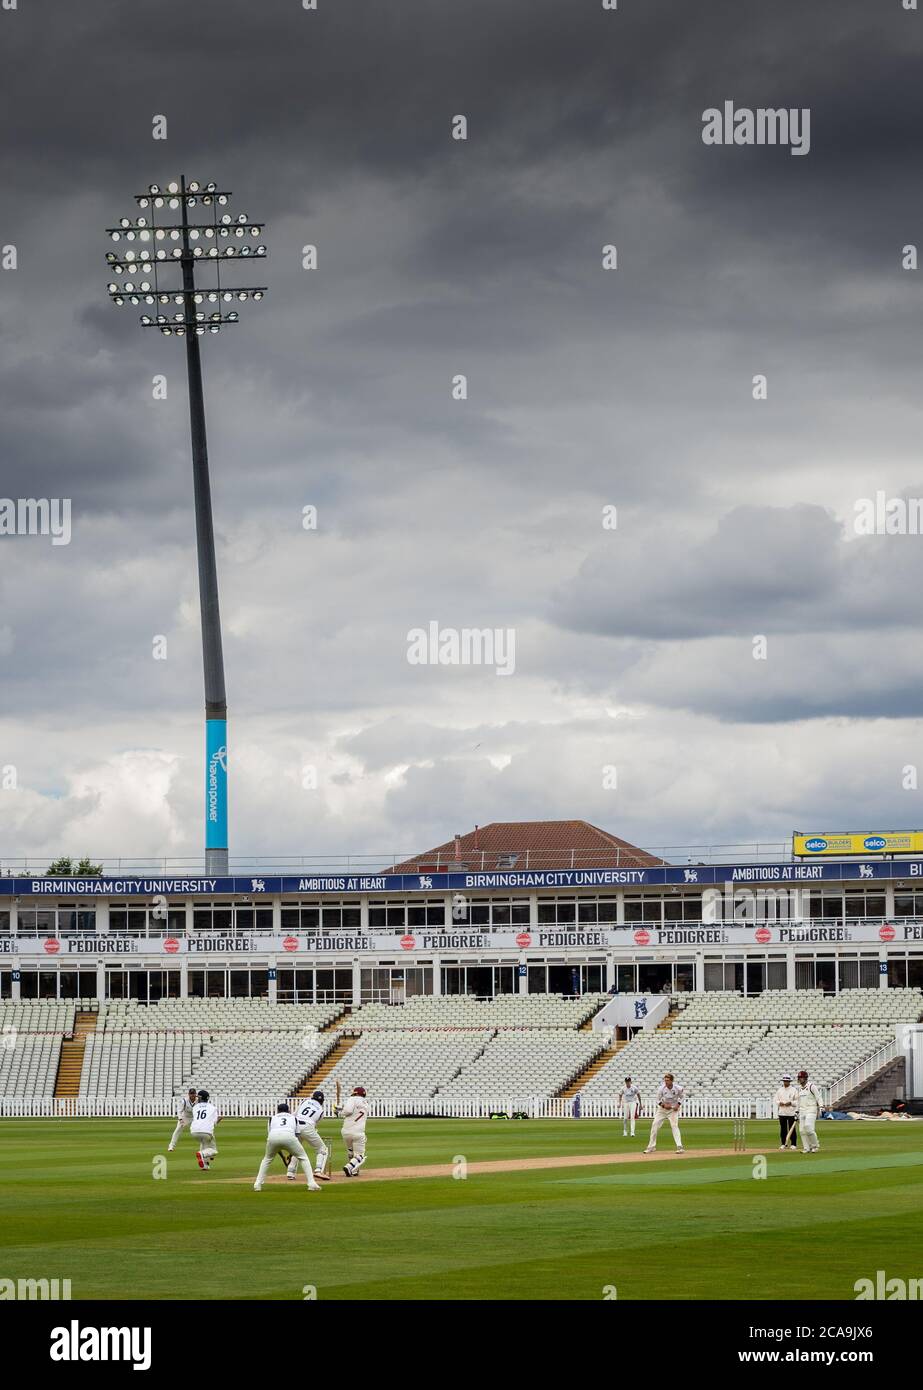 Edgbaston cricket ground during match between Warwickshire and Northamptonshire. Covid-19 restrictions meant that no spectators were allowed in. Stock Photo